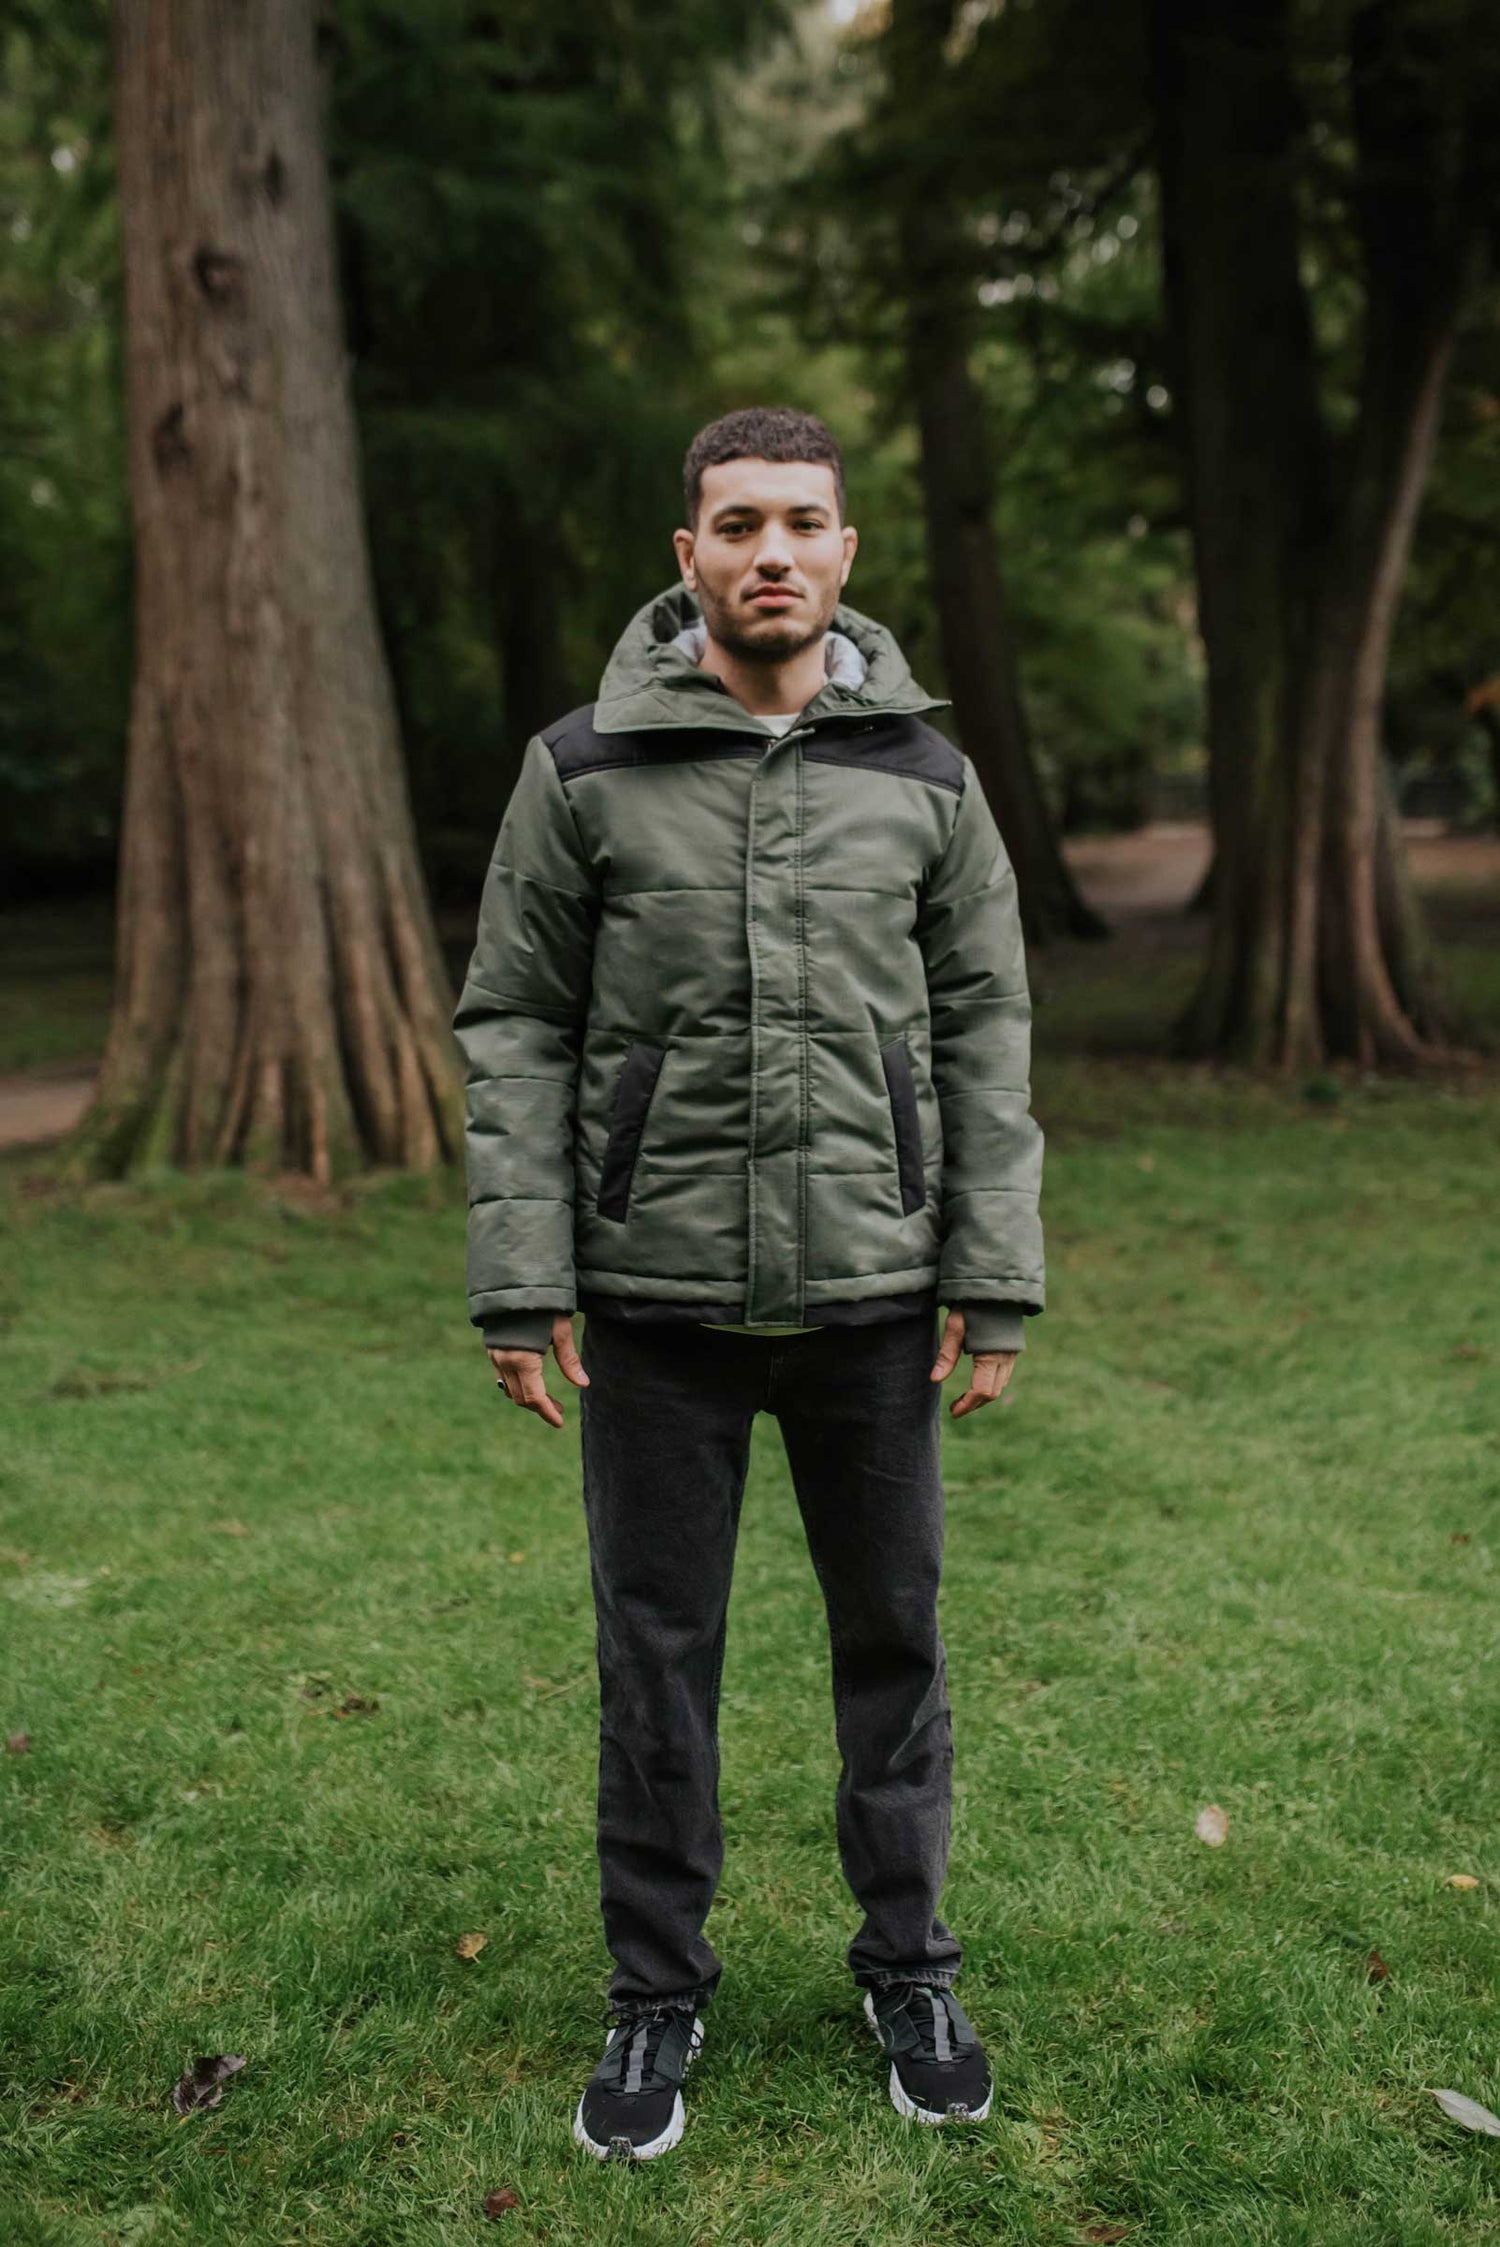 All weather proof sustainable hemp winter jacket, with an adjustable hood, ribbed knit cuffs with thumbholes and zipper windguard to keep the elements out. The soft vegan padding is made from 100% certified recycled plastic bottles, by the innovative Repreve® - Front View Closed